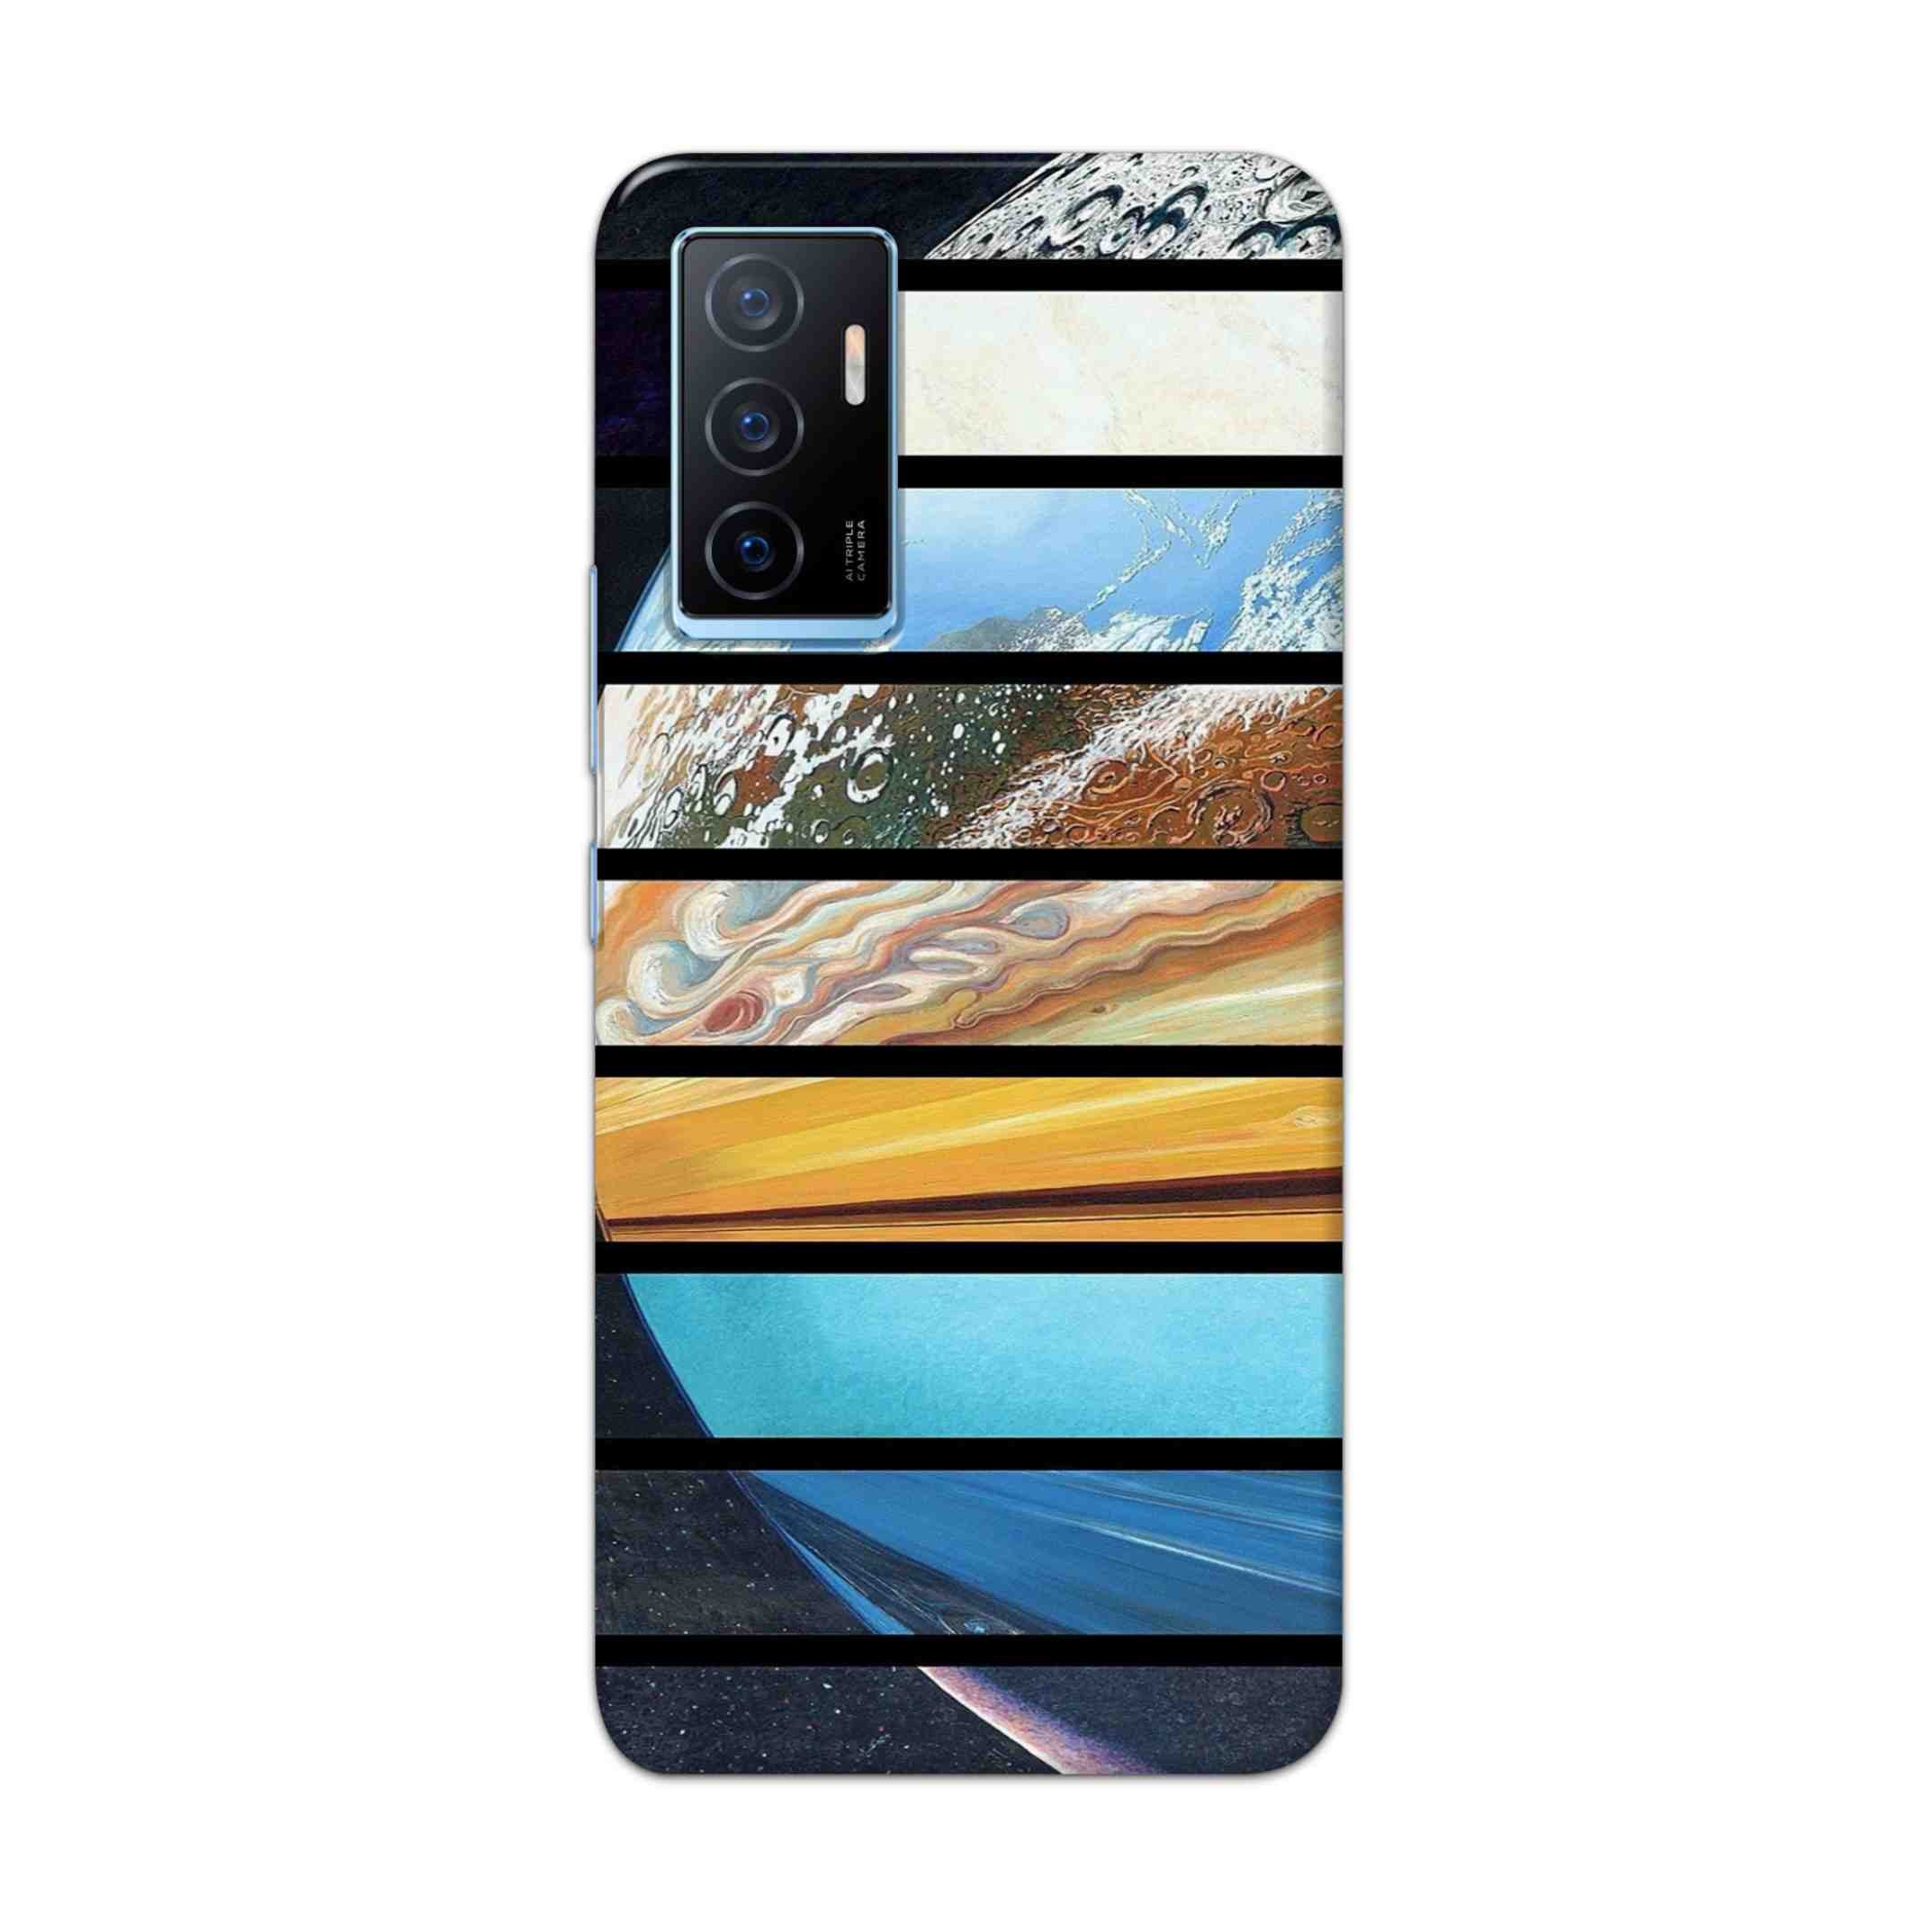 Buy Colourful Earth Hard Back Mobile Phone Case Cover For Vivo Y75 4G Online